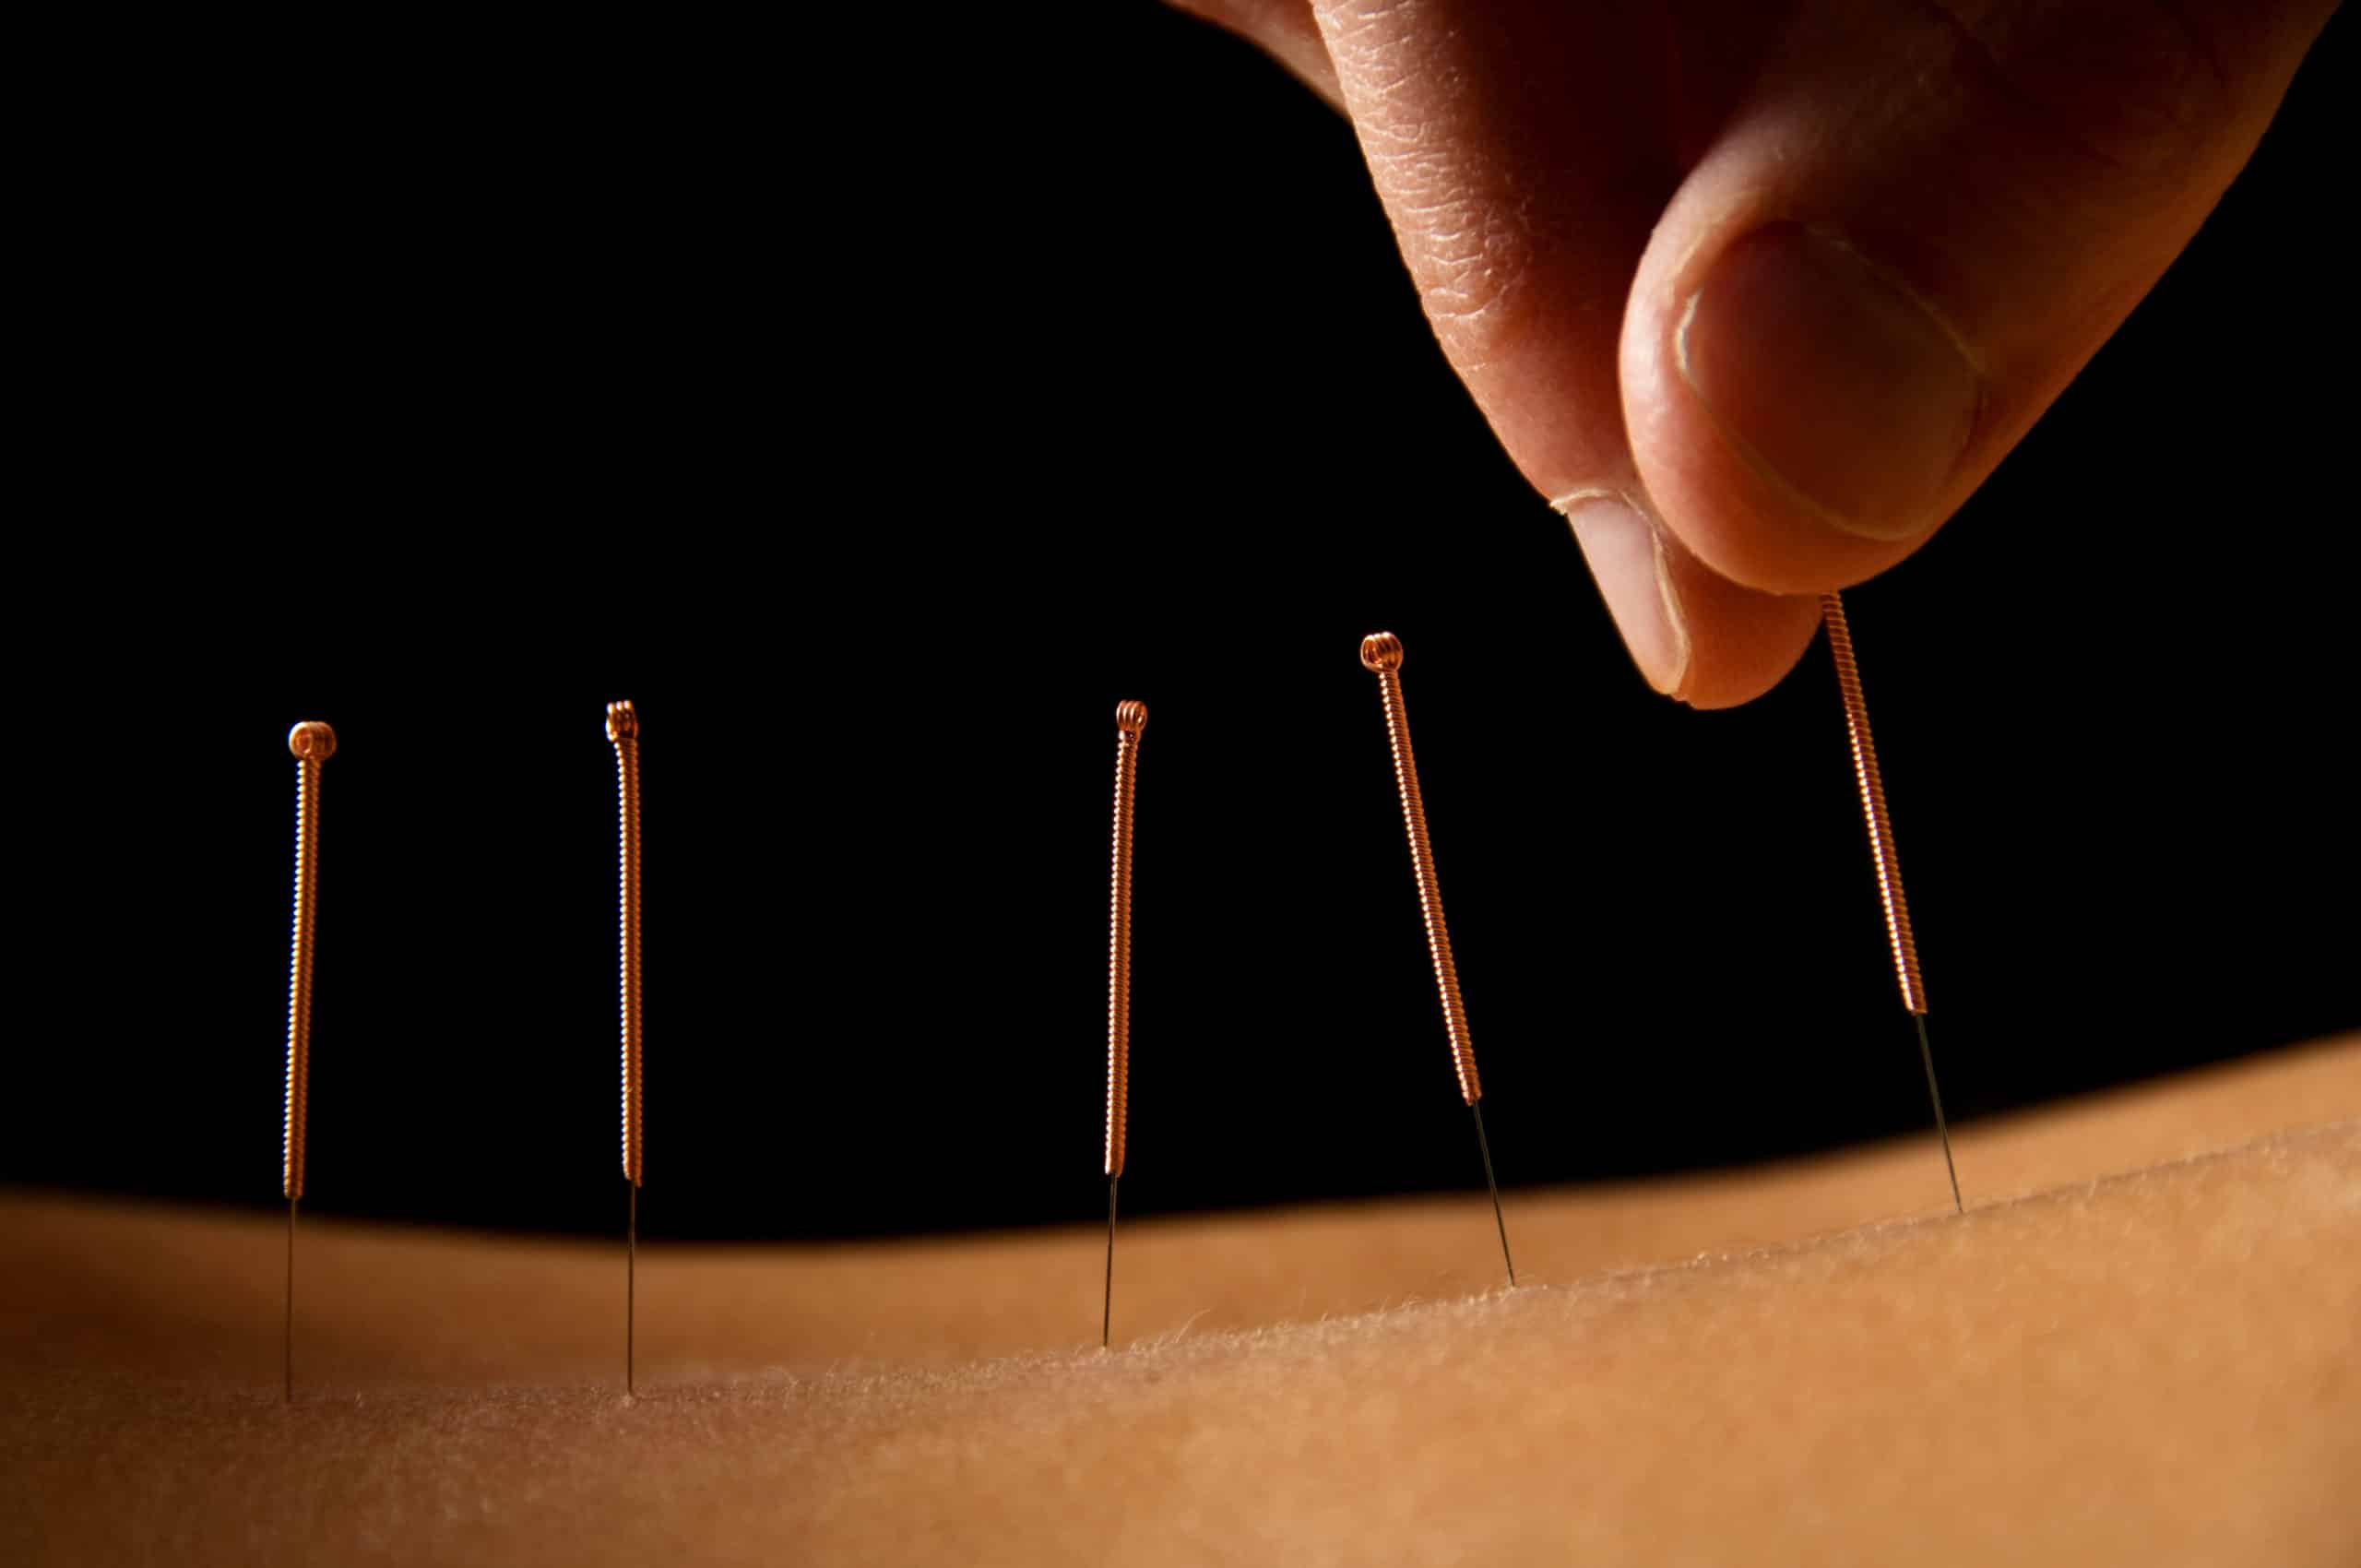 Triumph Physio clinician putting acupuncture needles in the back